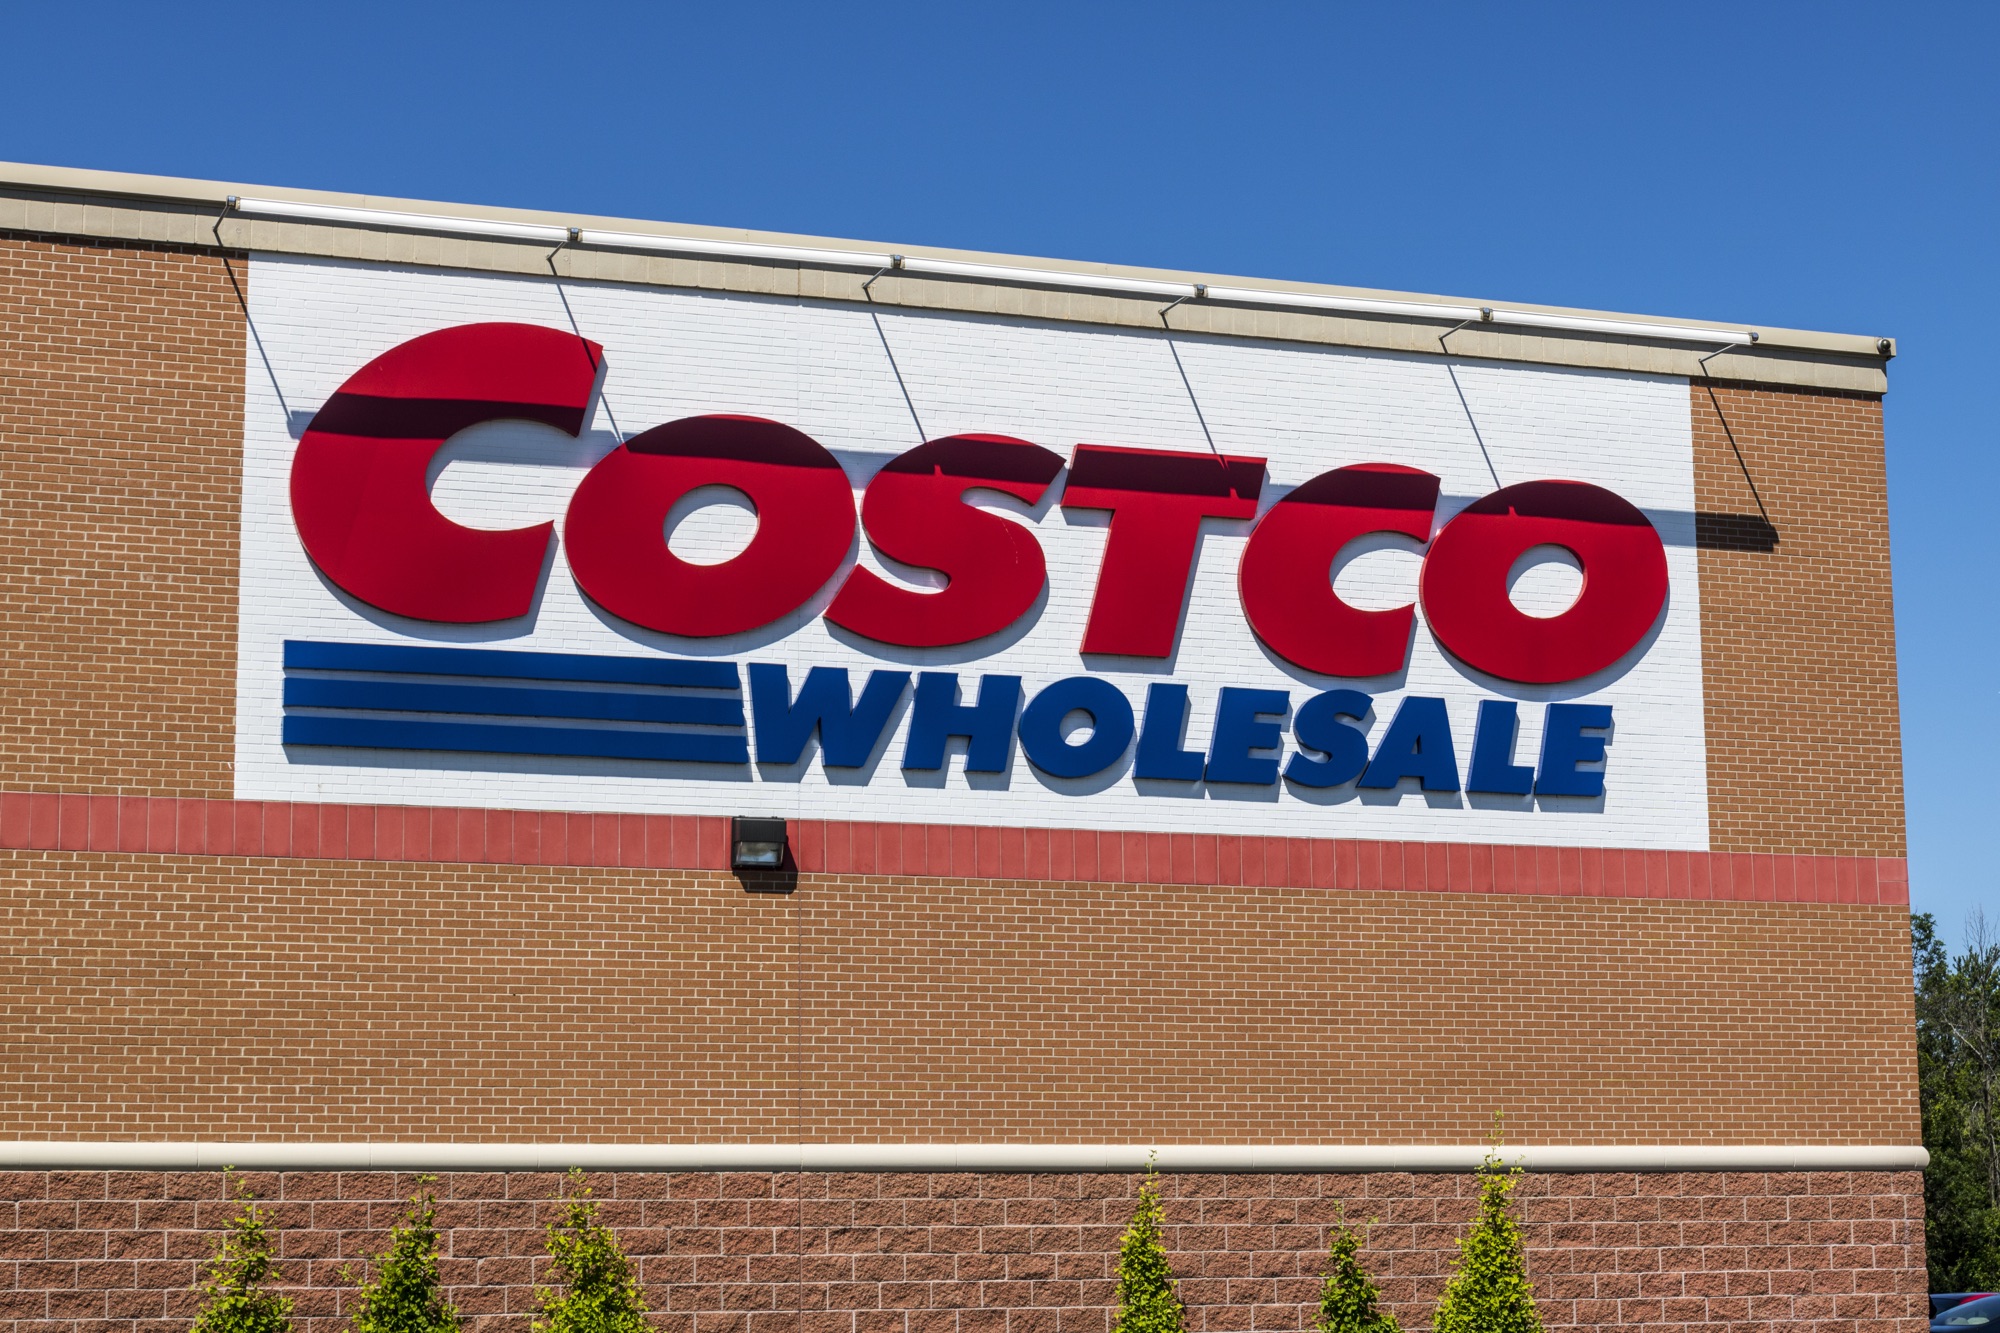 13 Costco Favorites You Should Always Add to Your Cart